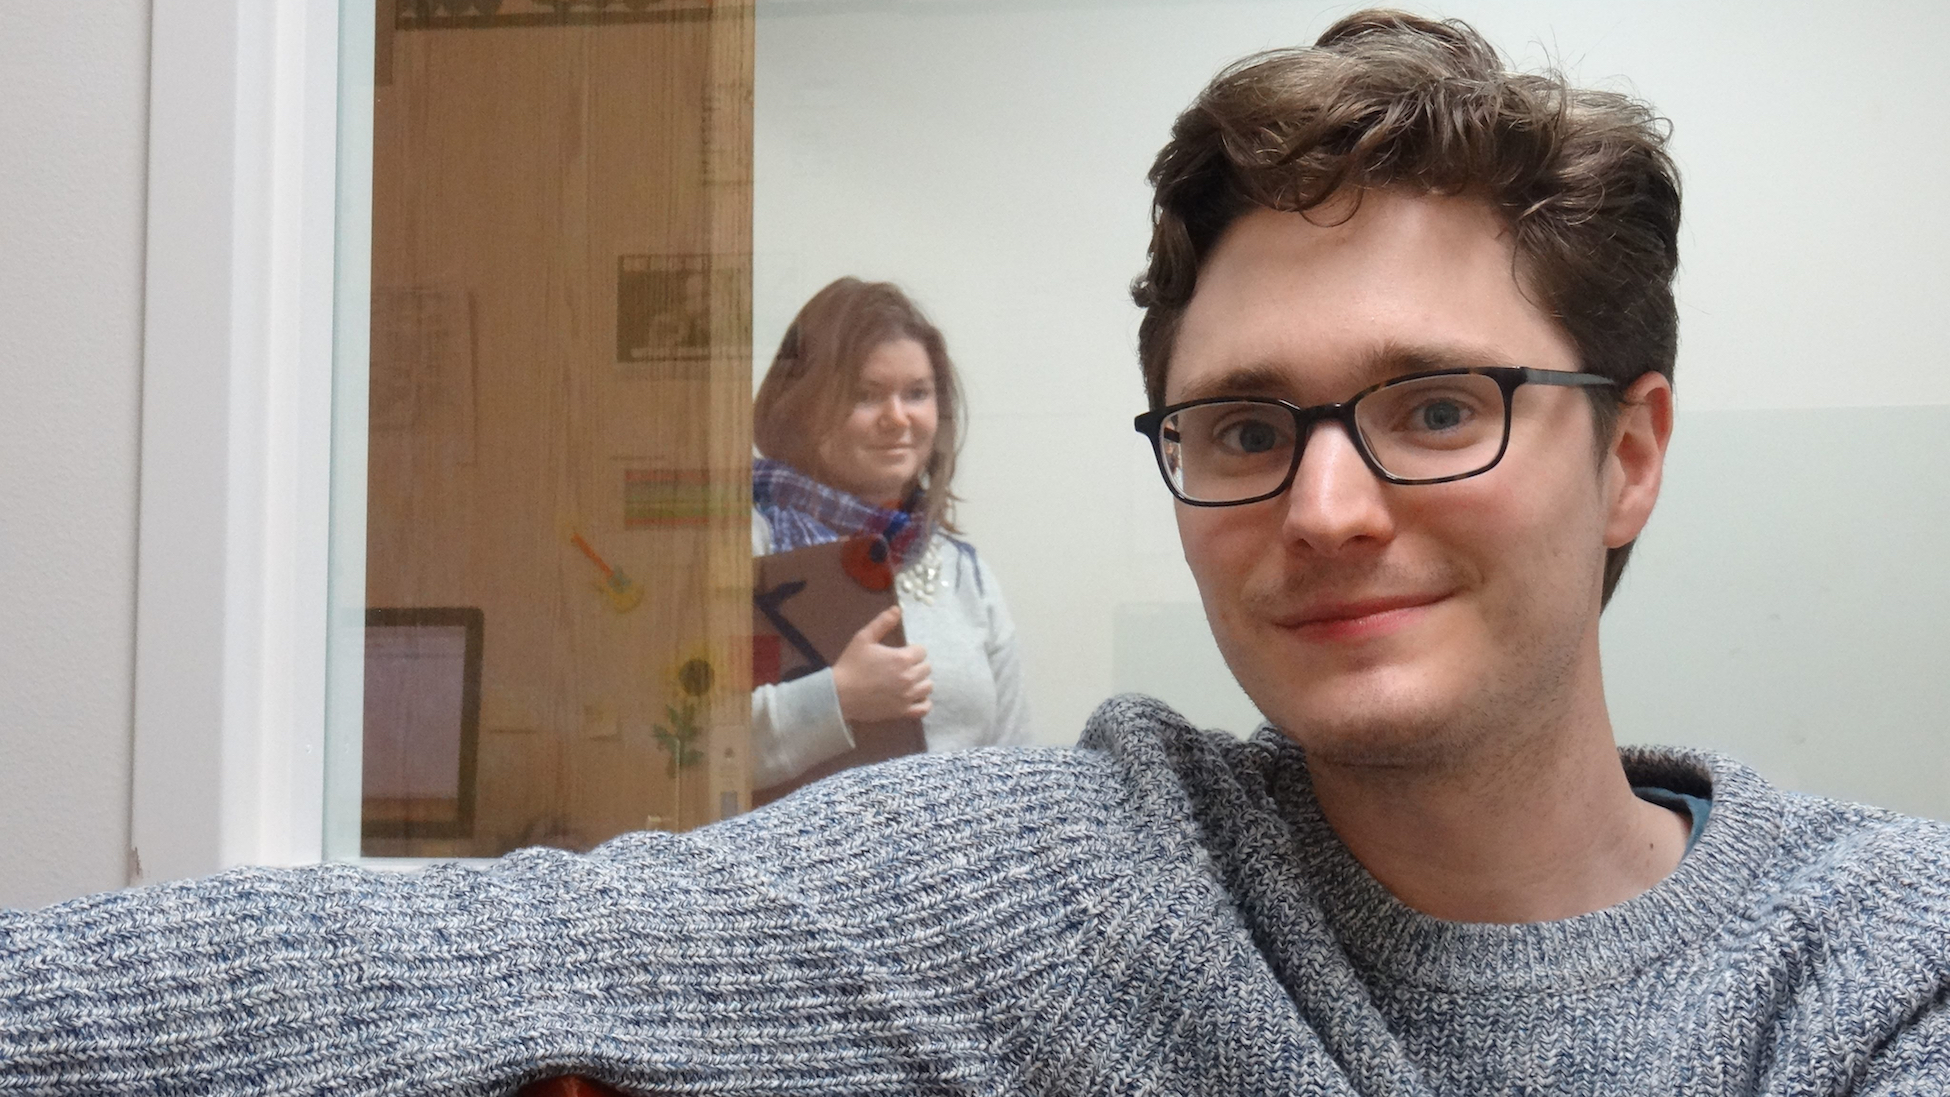 Tyler Knowlton, a PhD student in Linguistics, smiling at the camera, from his office desk, as his office mate skulks in behind him